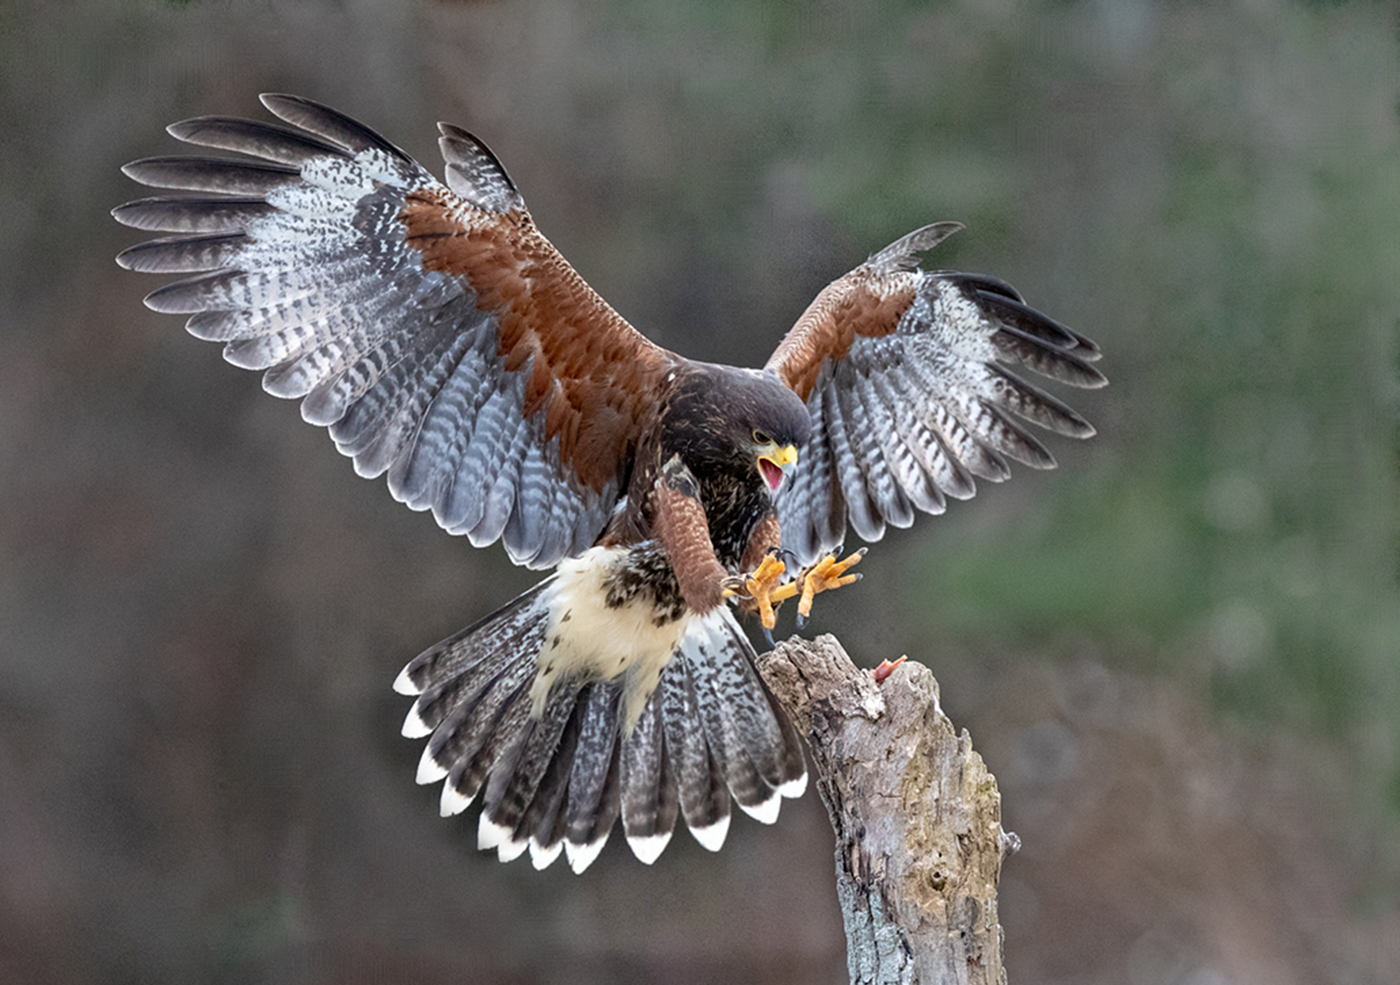 Red tail hawk by Chinh Tran